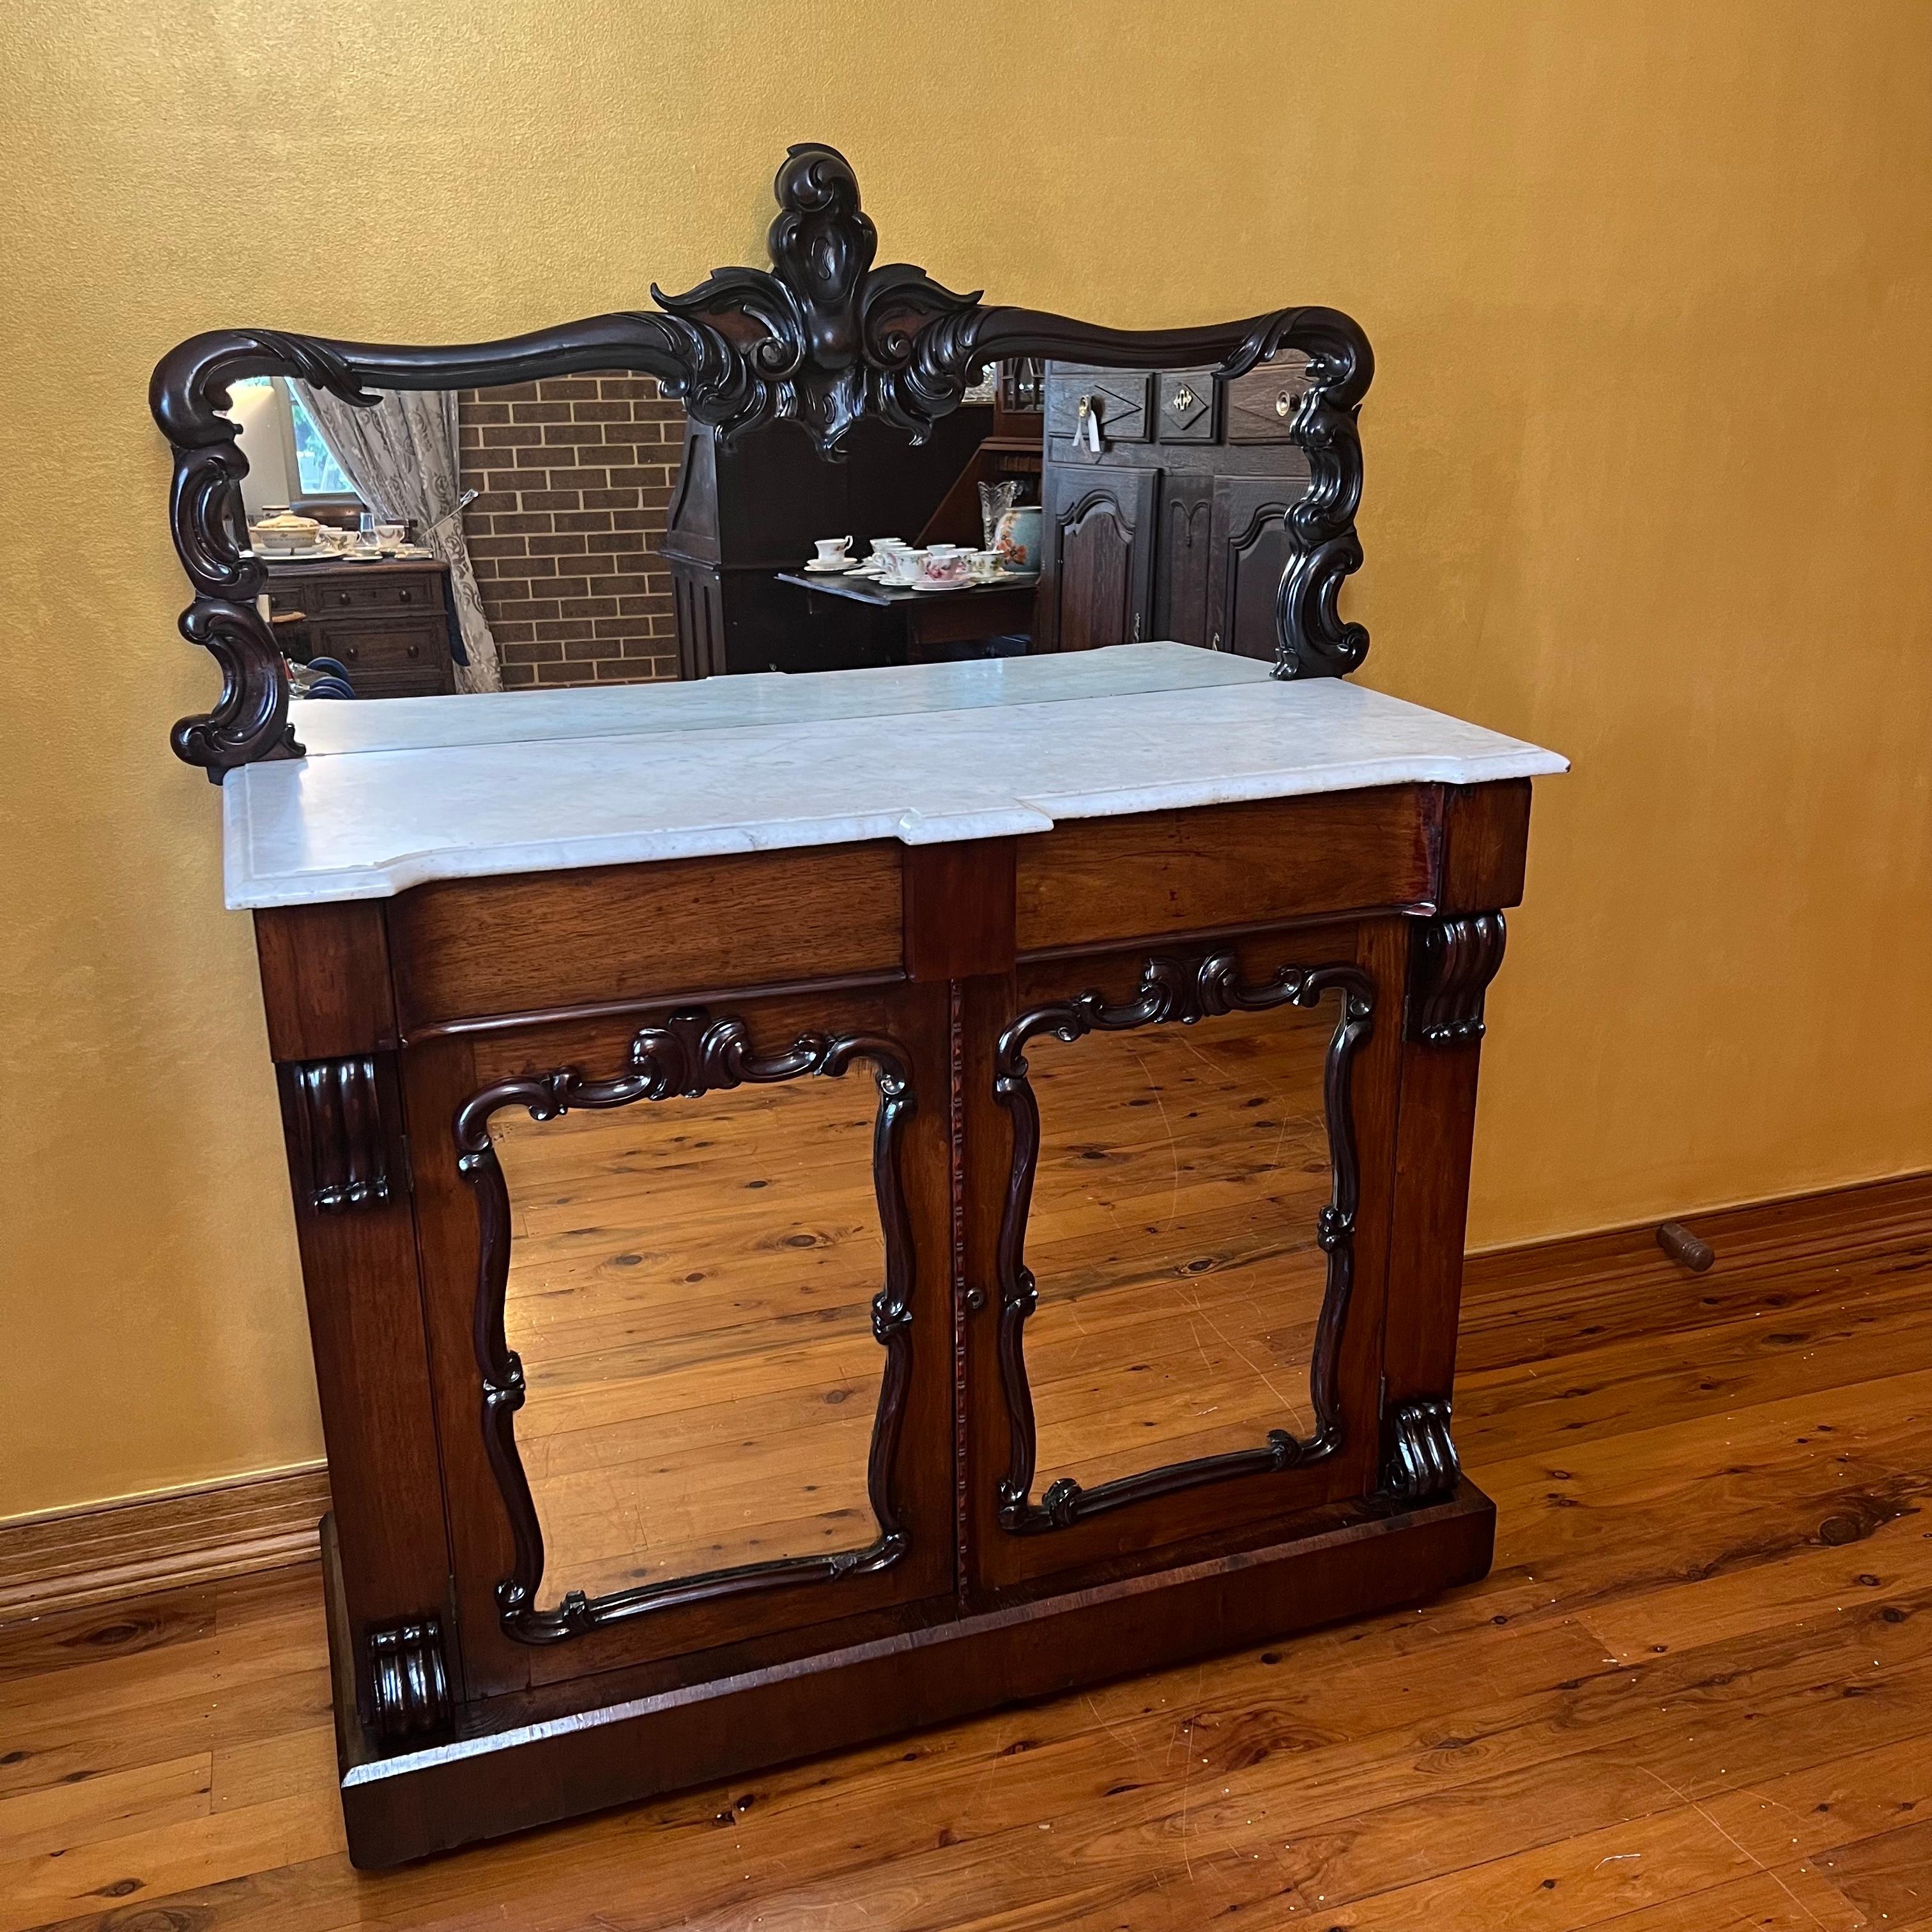 Mirrored top backboard with carved edge detail, bottom doors mirrored with two shelve inside, two drawers and marble top, marble top comes off for easier transport and movement, doesn't come with key. 

Circa: Early 19th Century 

Material: